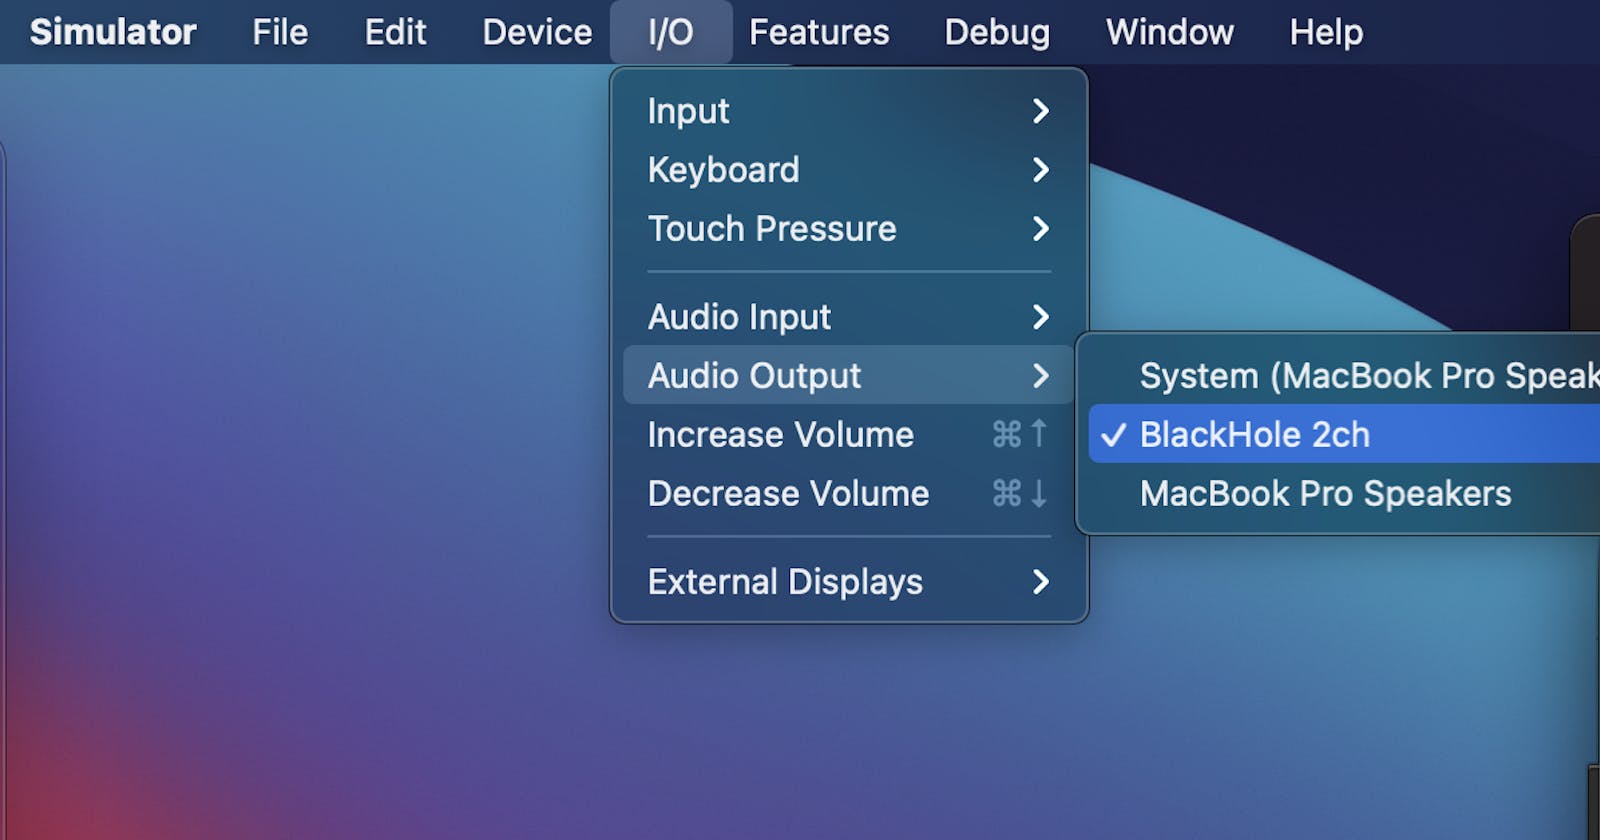 Fix crackling sound after opening Xcode Simulator.